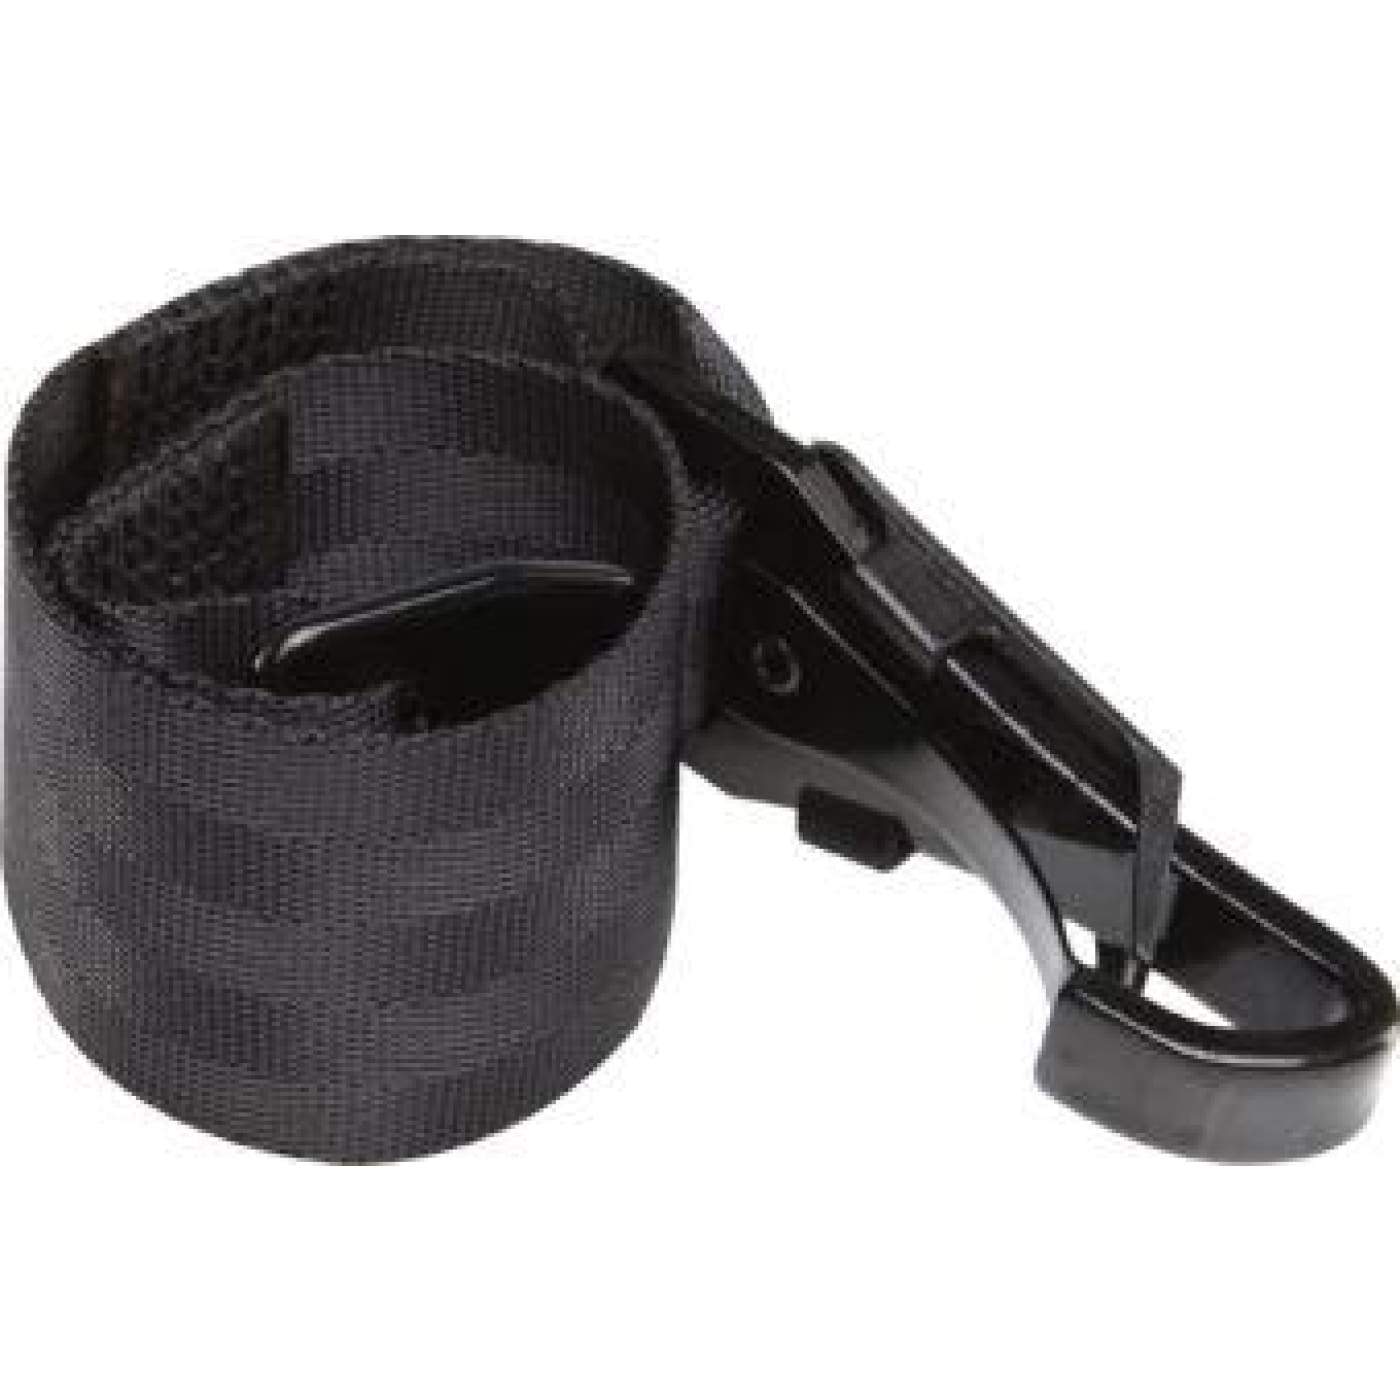 InfaSecure Extension Strap 600MM - CAR SEATS - ACCESSORIES FOR FITTING